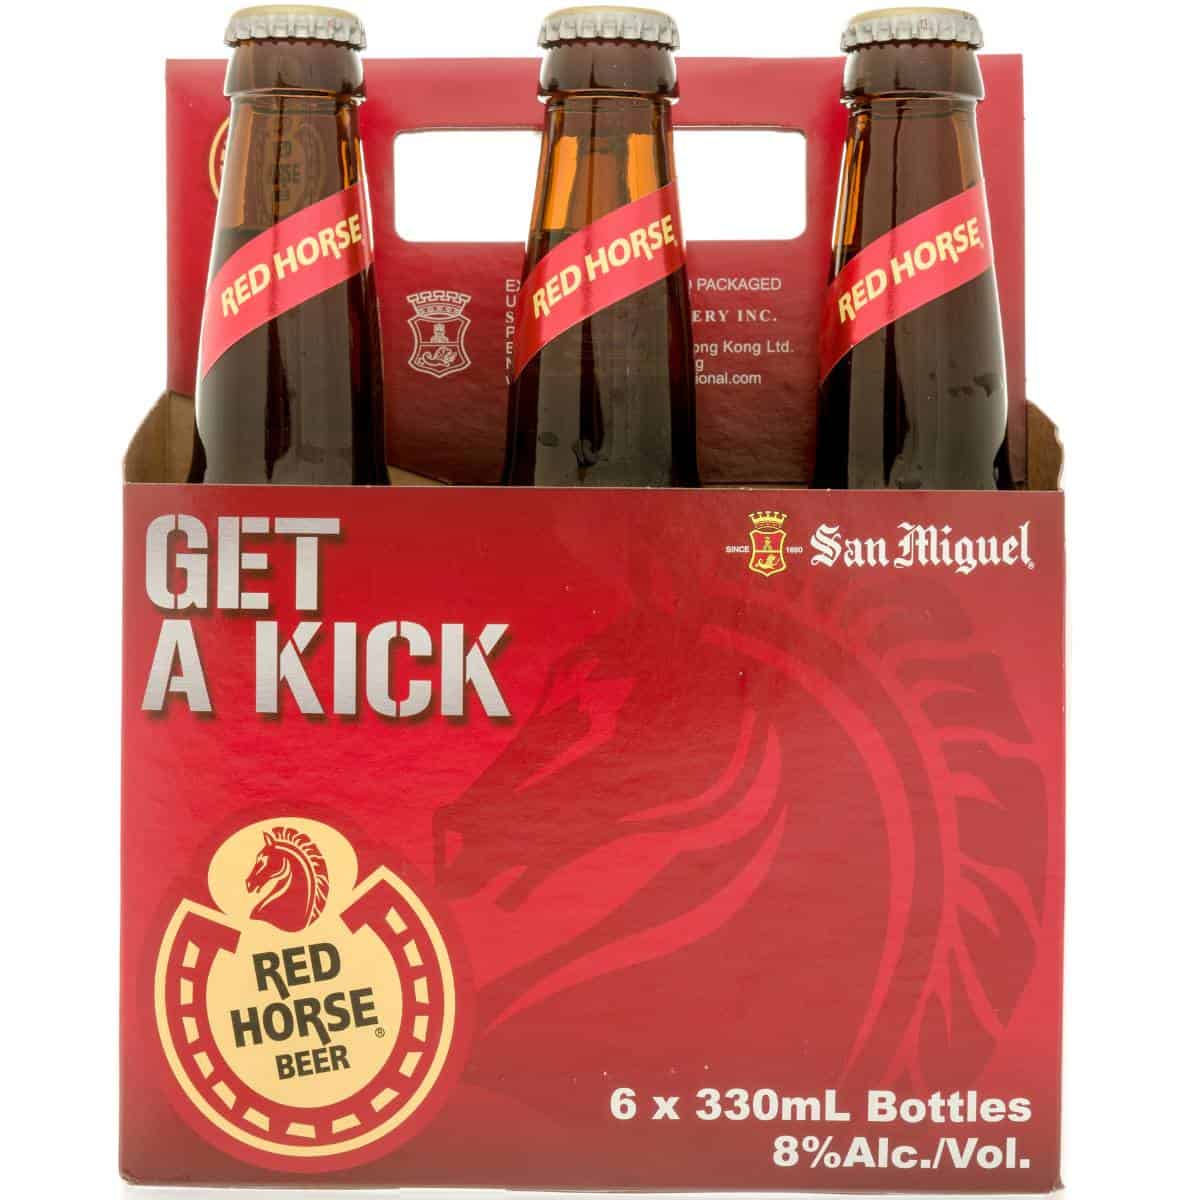 Get a kick red horse beer 6 pack, a popular choice among Filipino drinks.